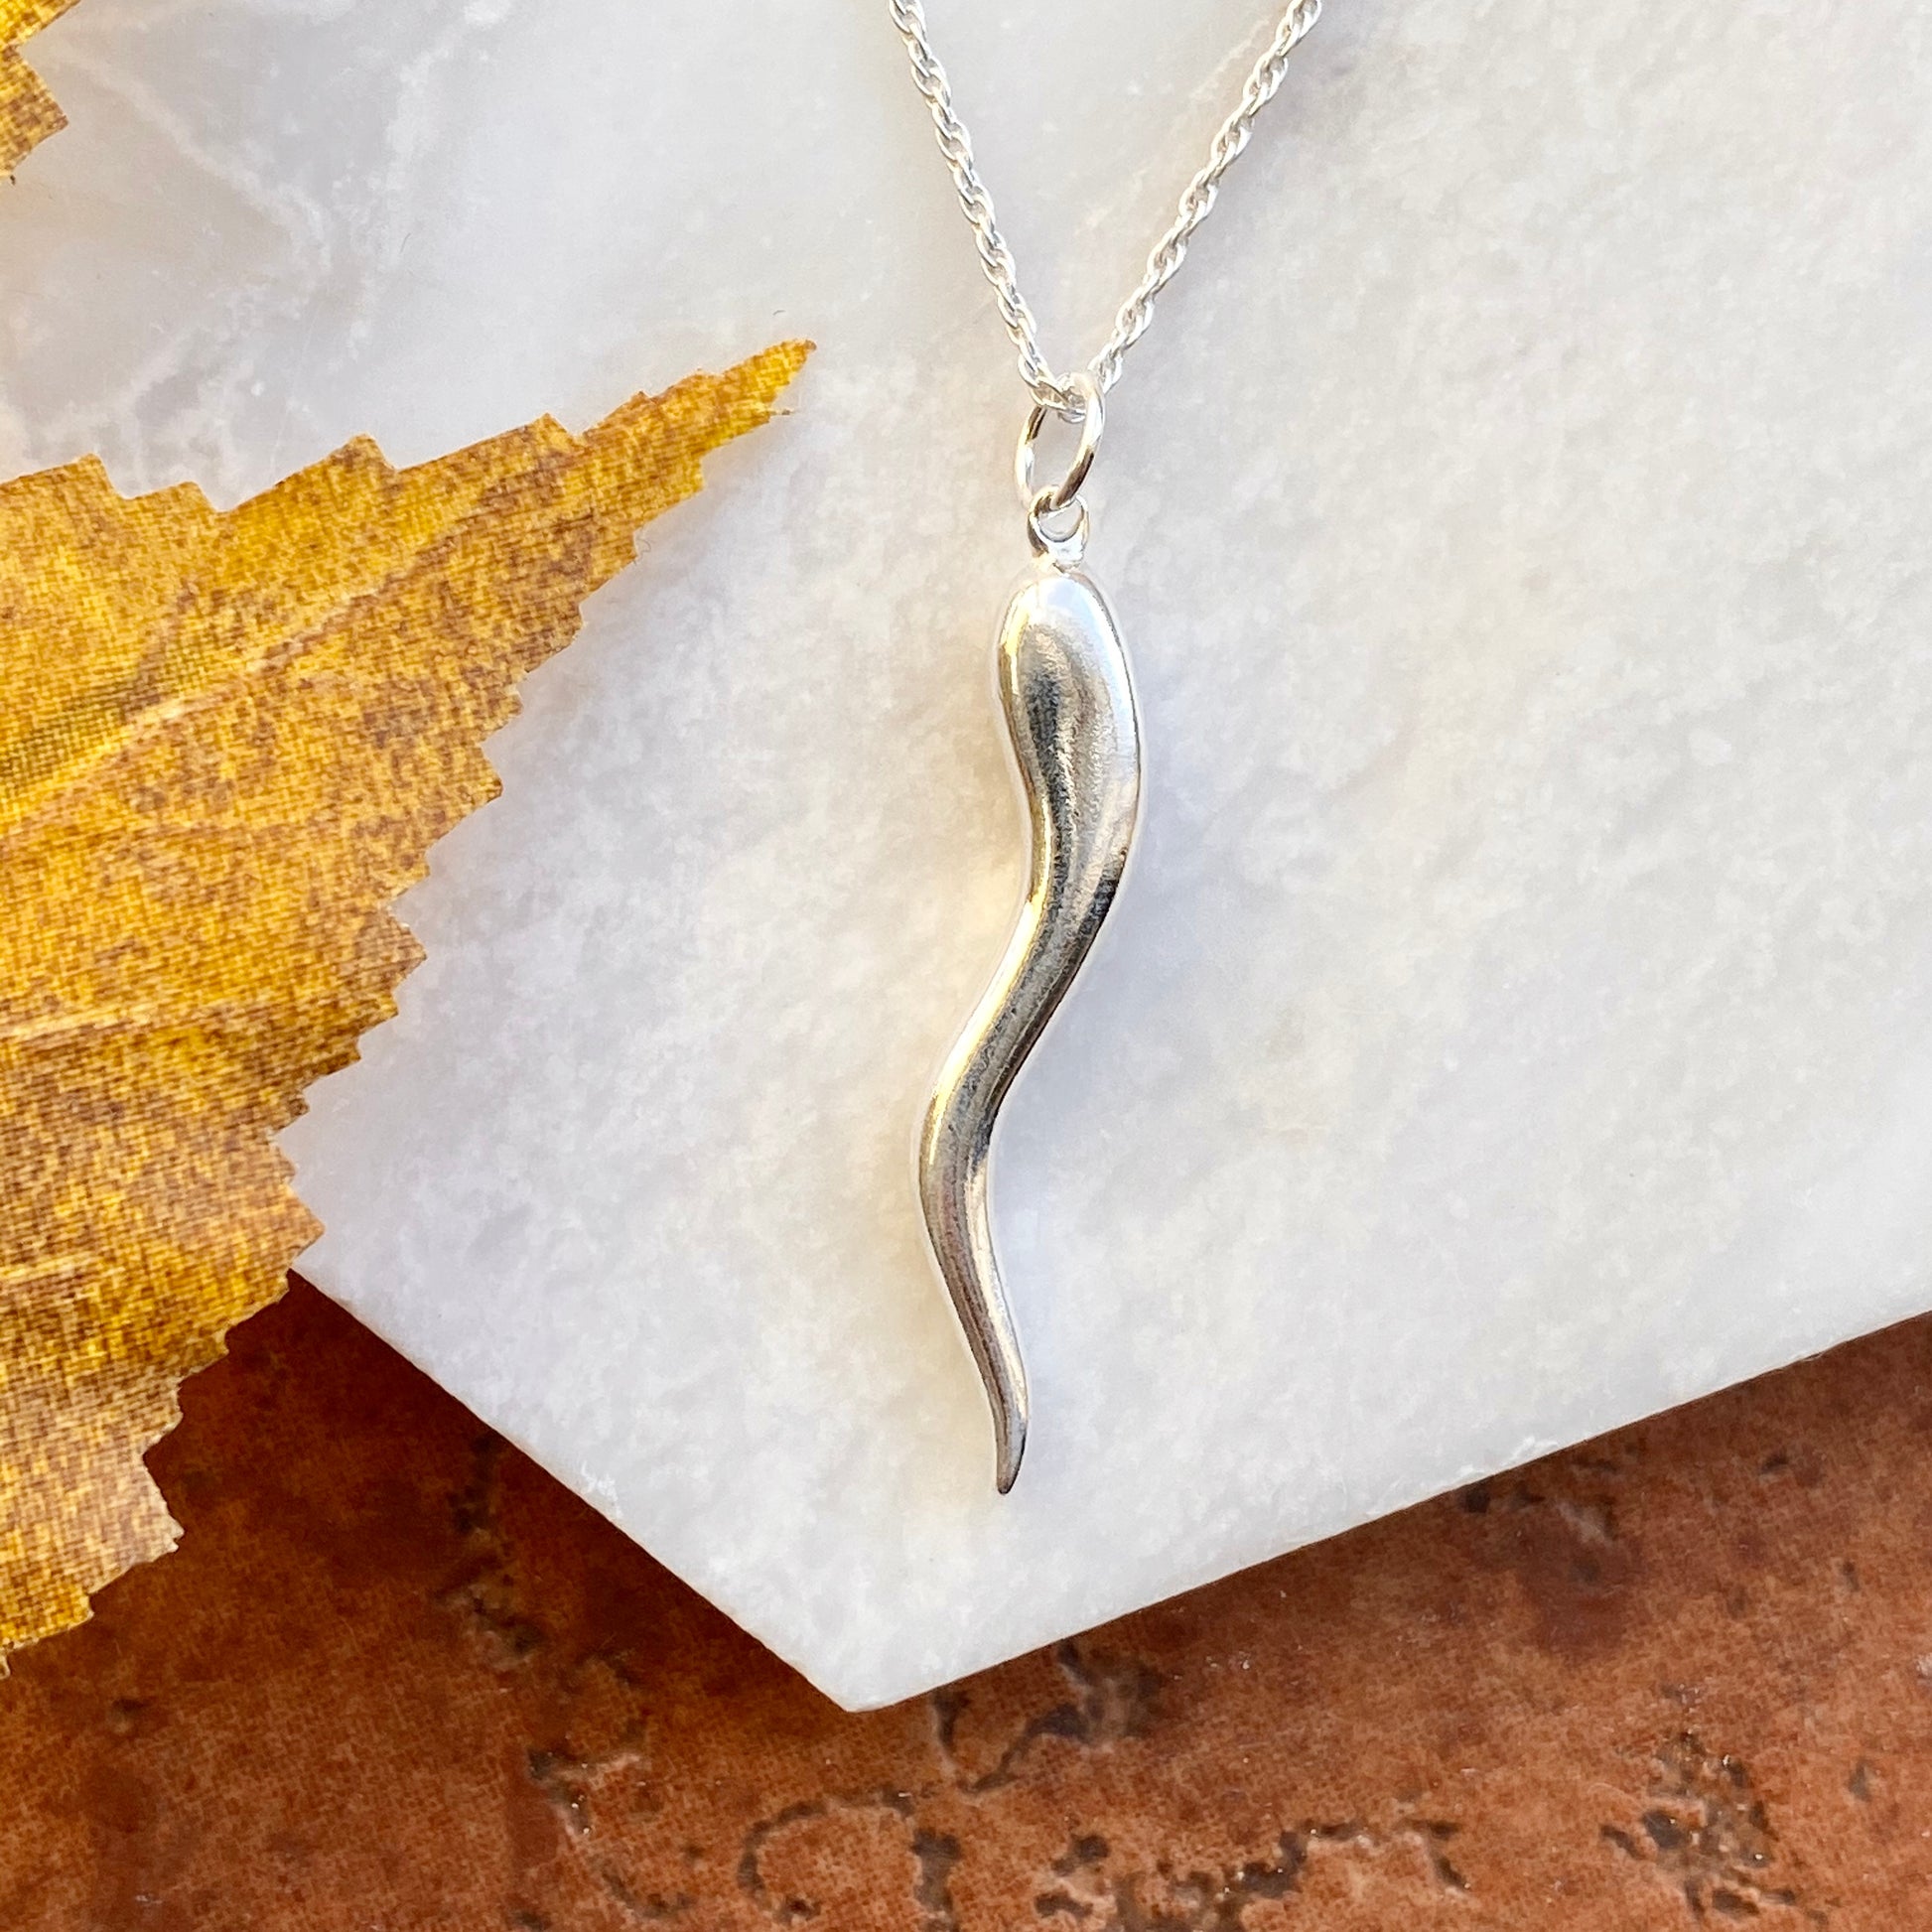 Sterling Silver Large "Cornicello" Italian Horn Pendant Necklace, Sterling Silver Large "Cornicello" Italian Horn Pendant Necklace - Legacy Saint Jewelry